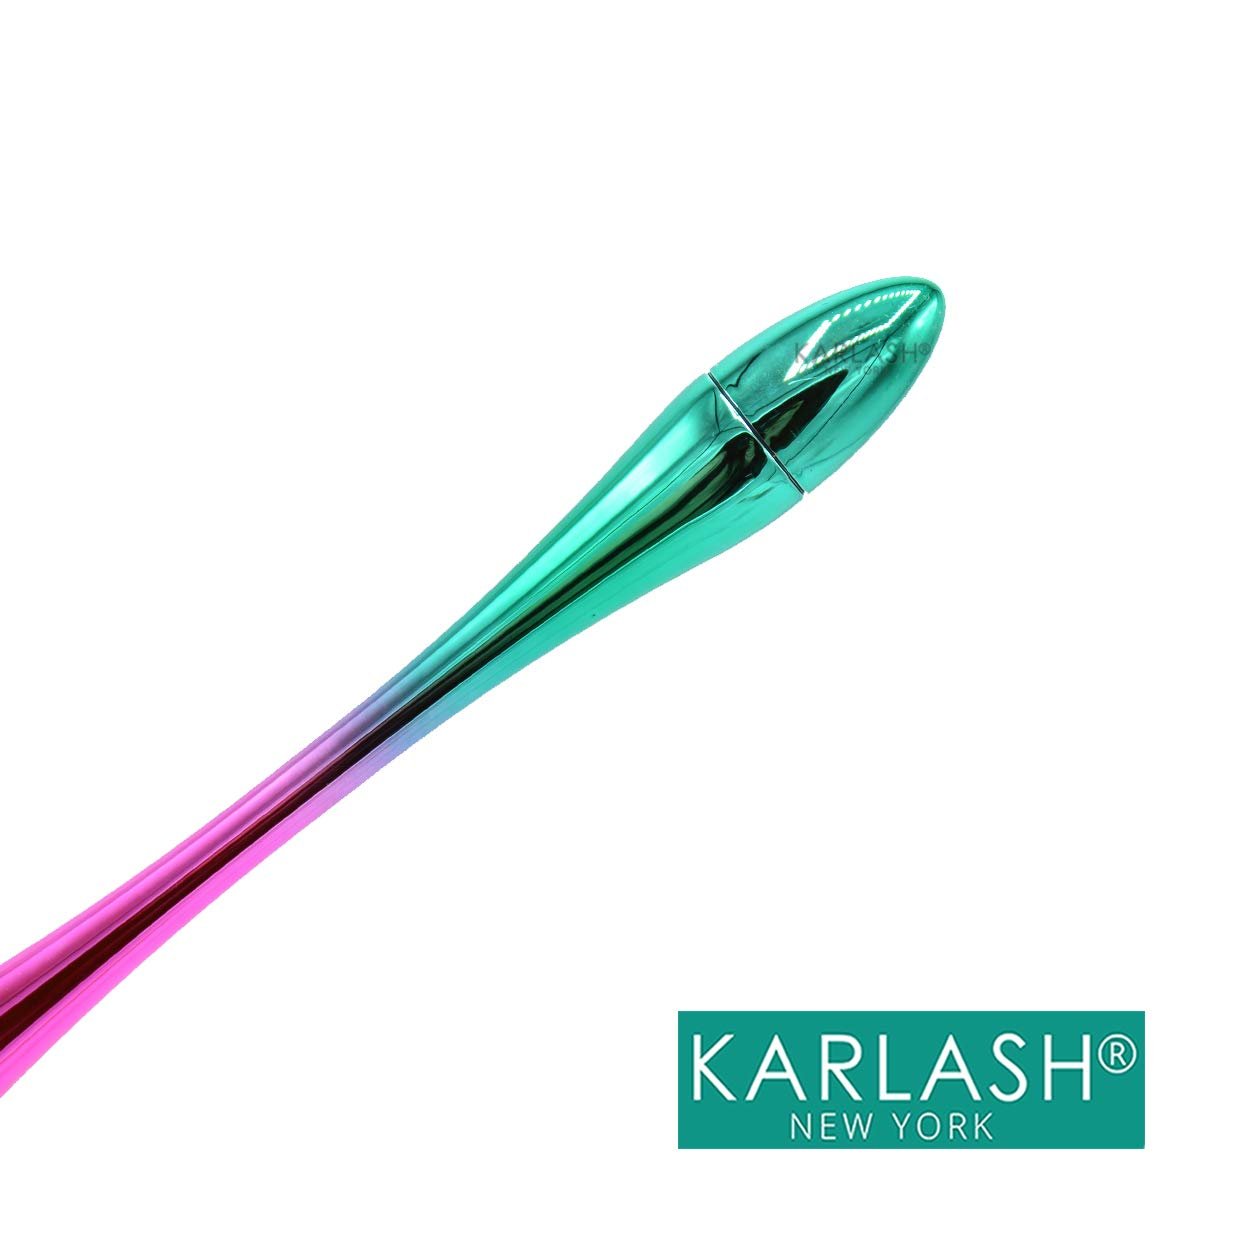 Karlash Nail Art Manicure Dust Remover Brush for Acrylic & UVGel Nails,Makeup Powder Brush #6 (Colorful))